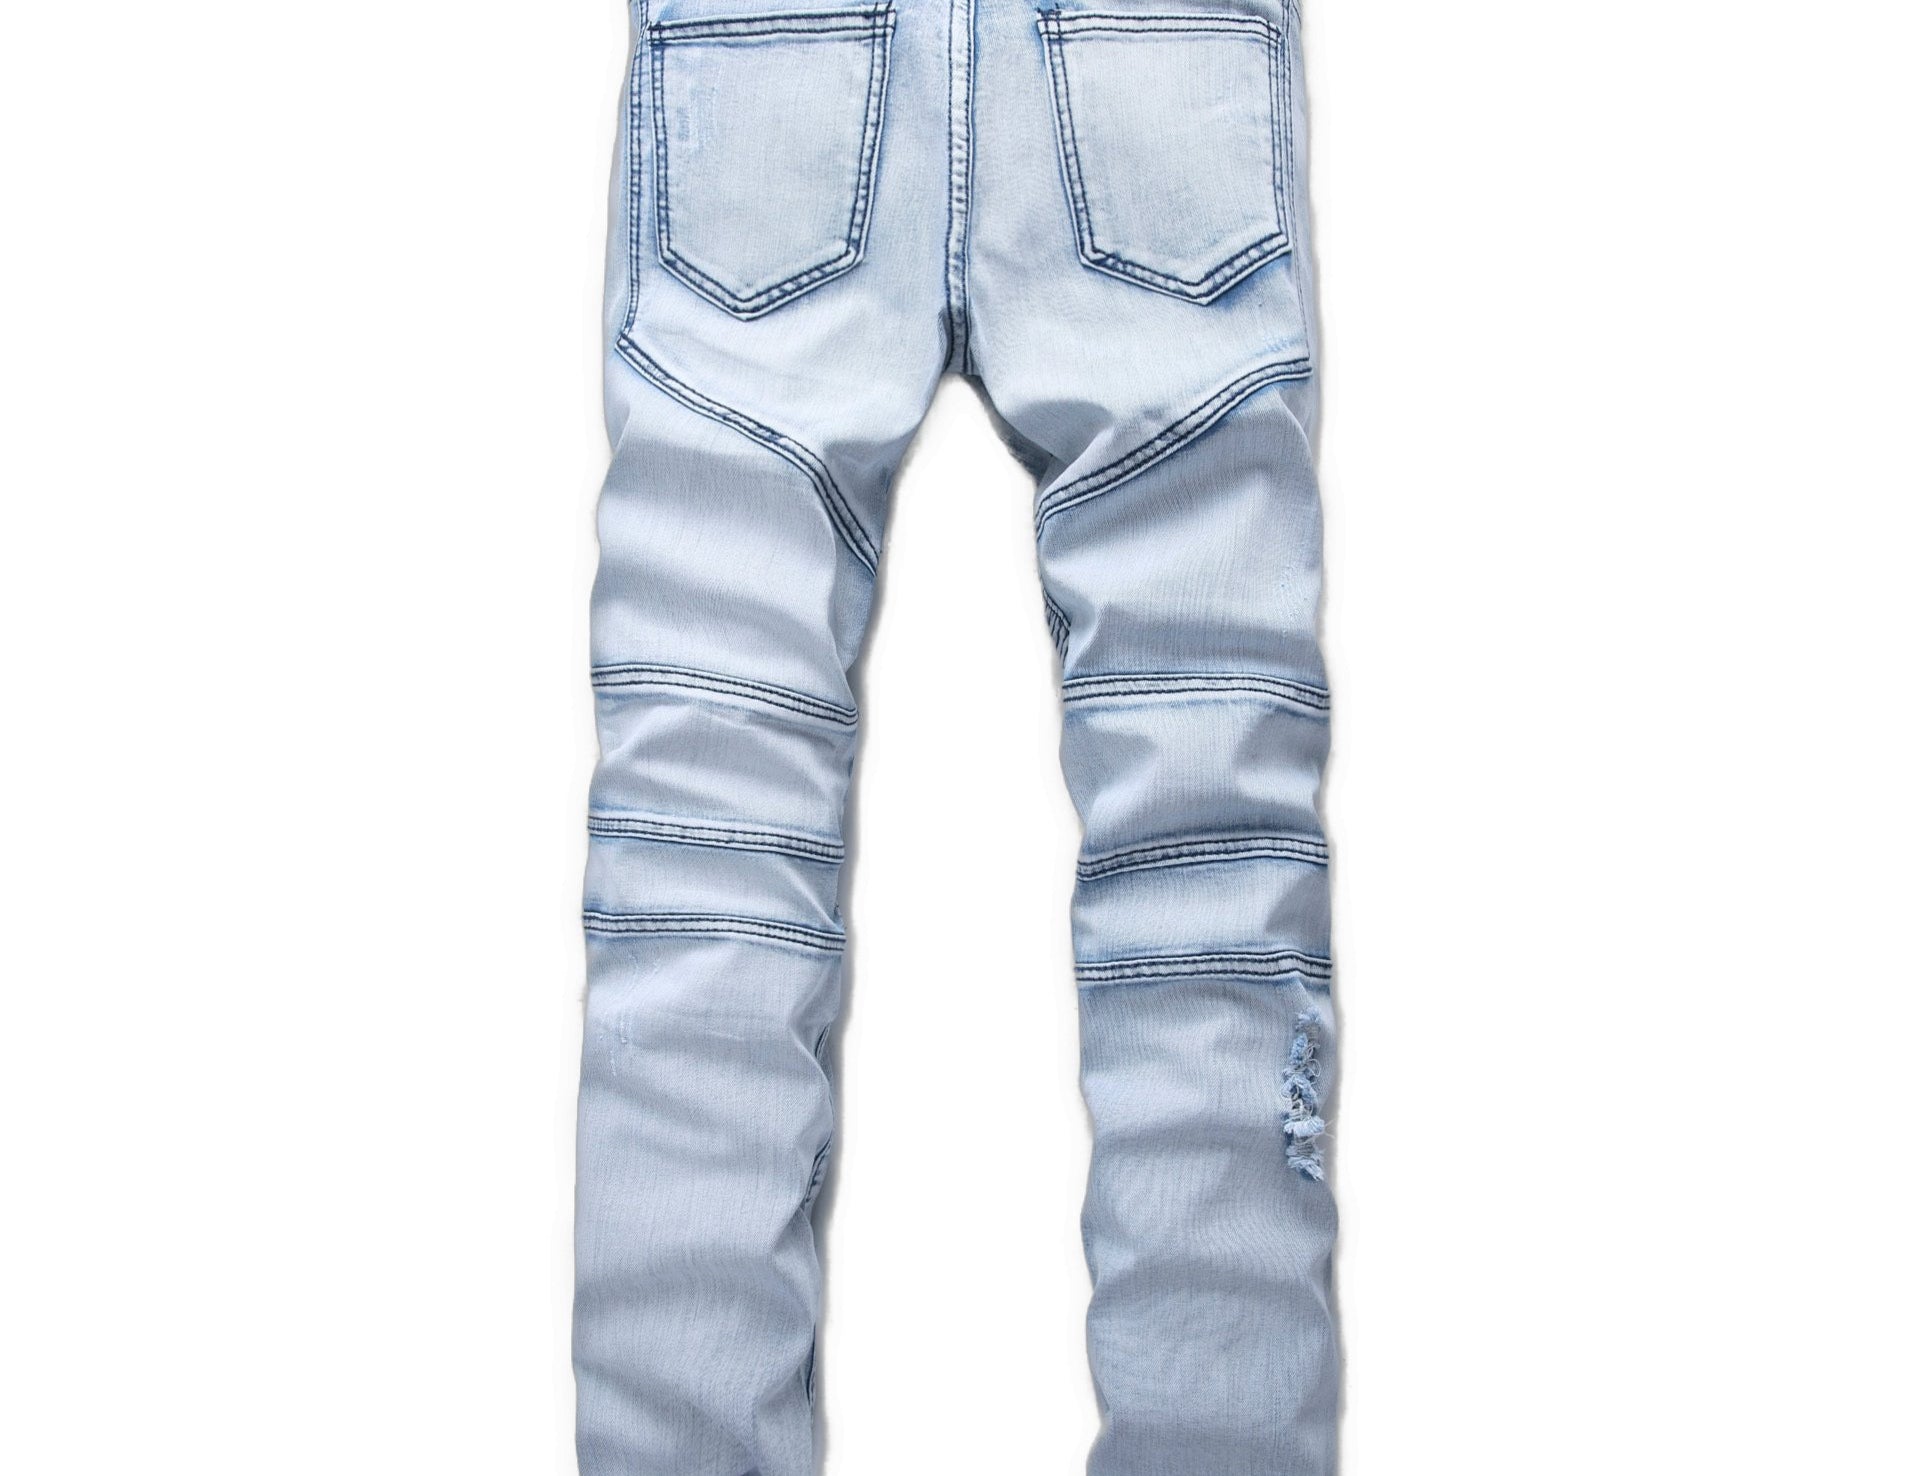 CFFT - Denim Jeans for Men - Sarman Fashion - Wholesale Clothing Fashion Brand for Men from Canada